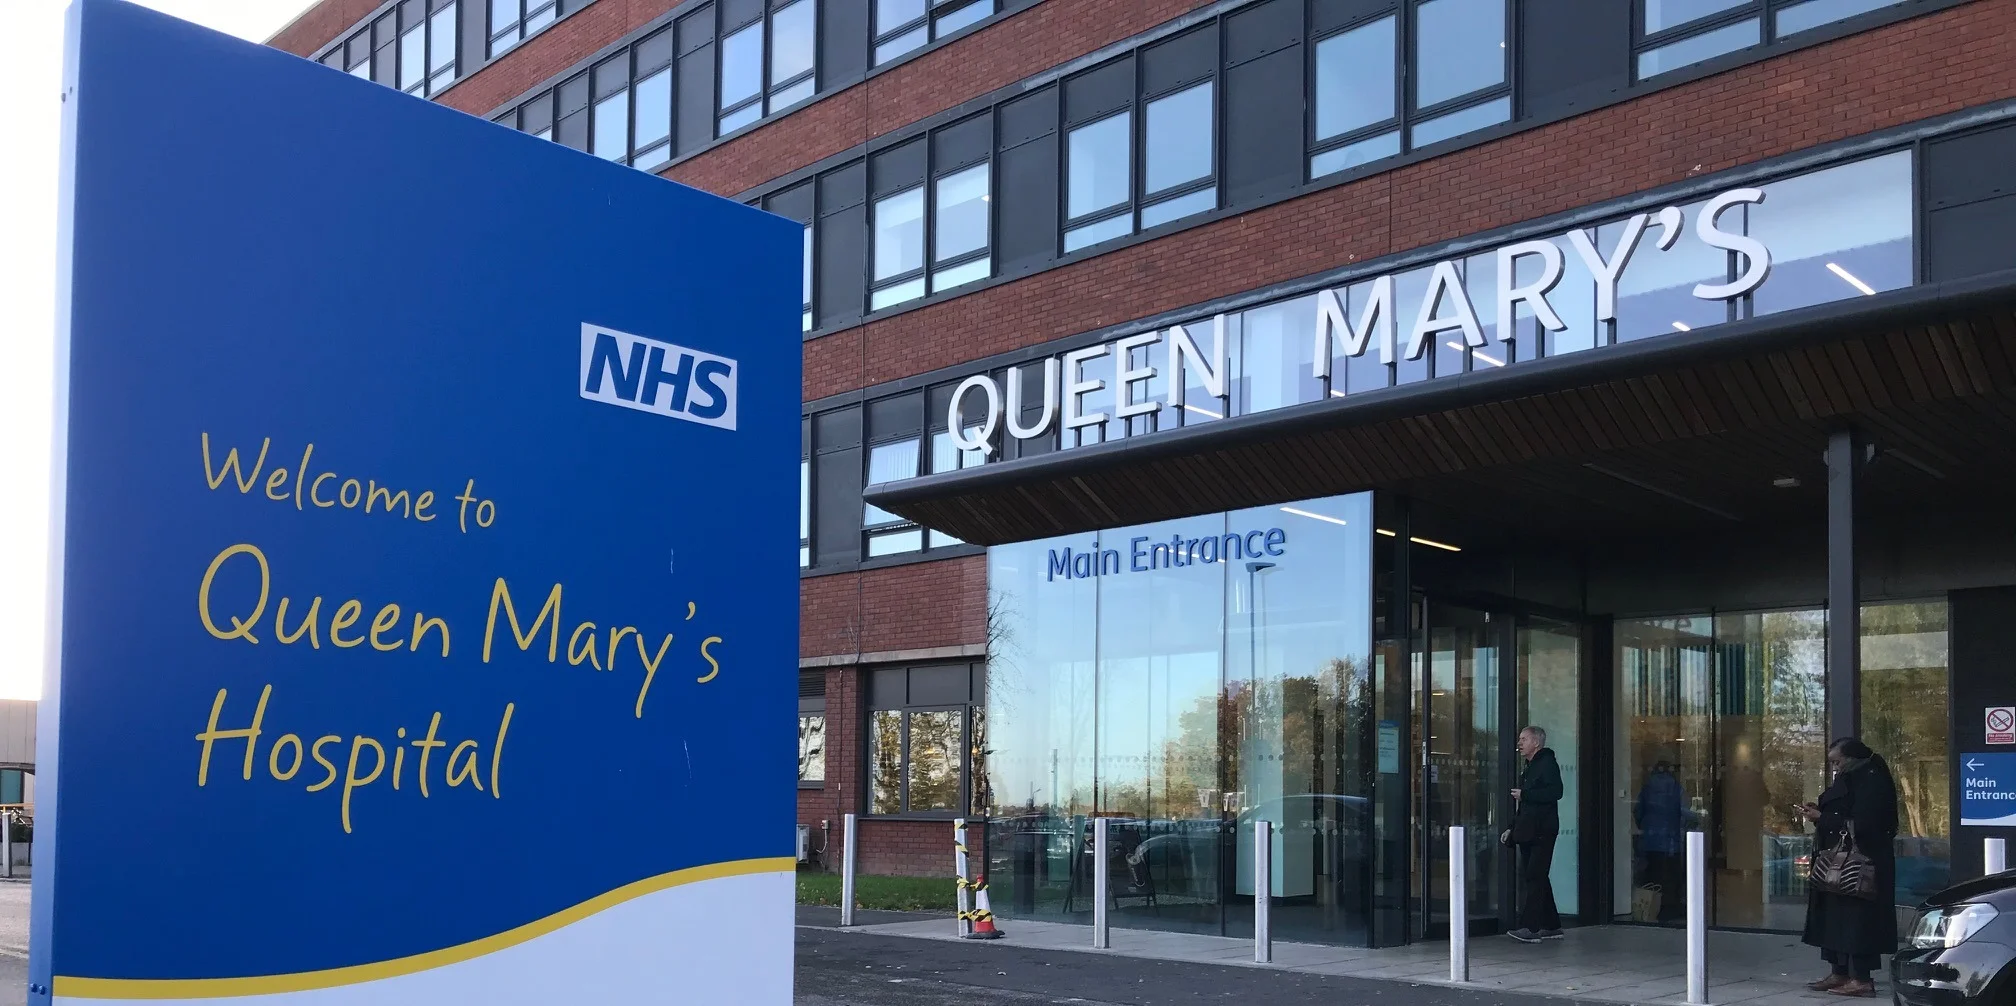 Queen Mary’s Hospital